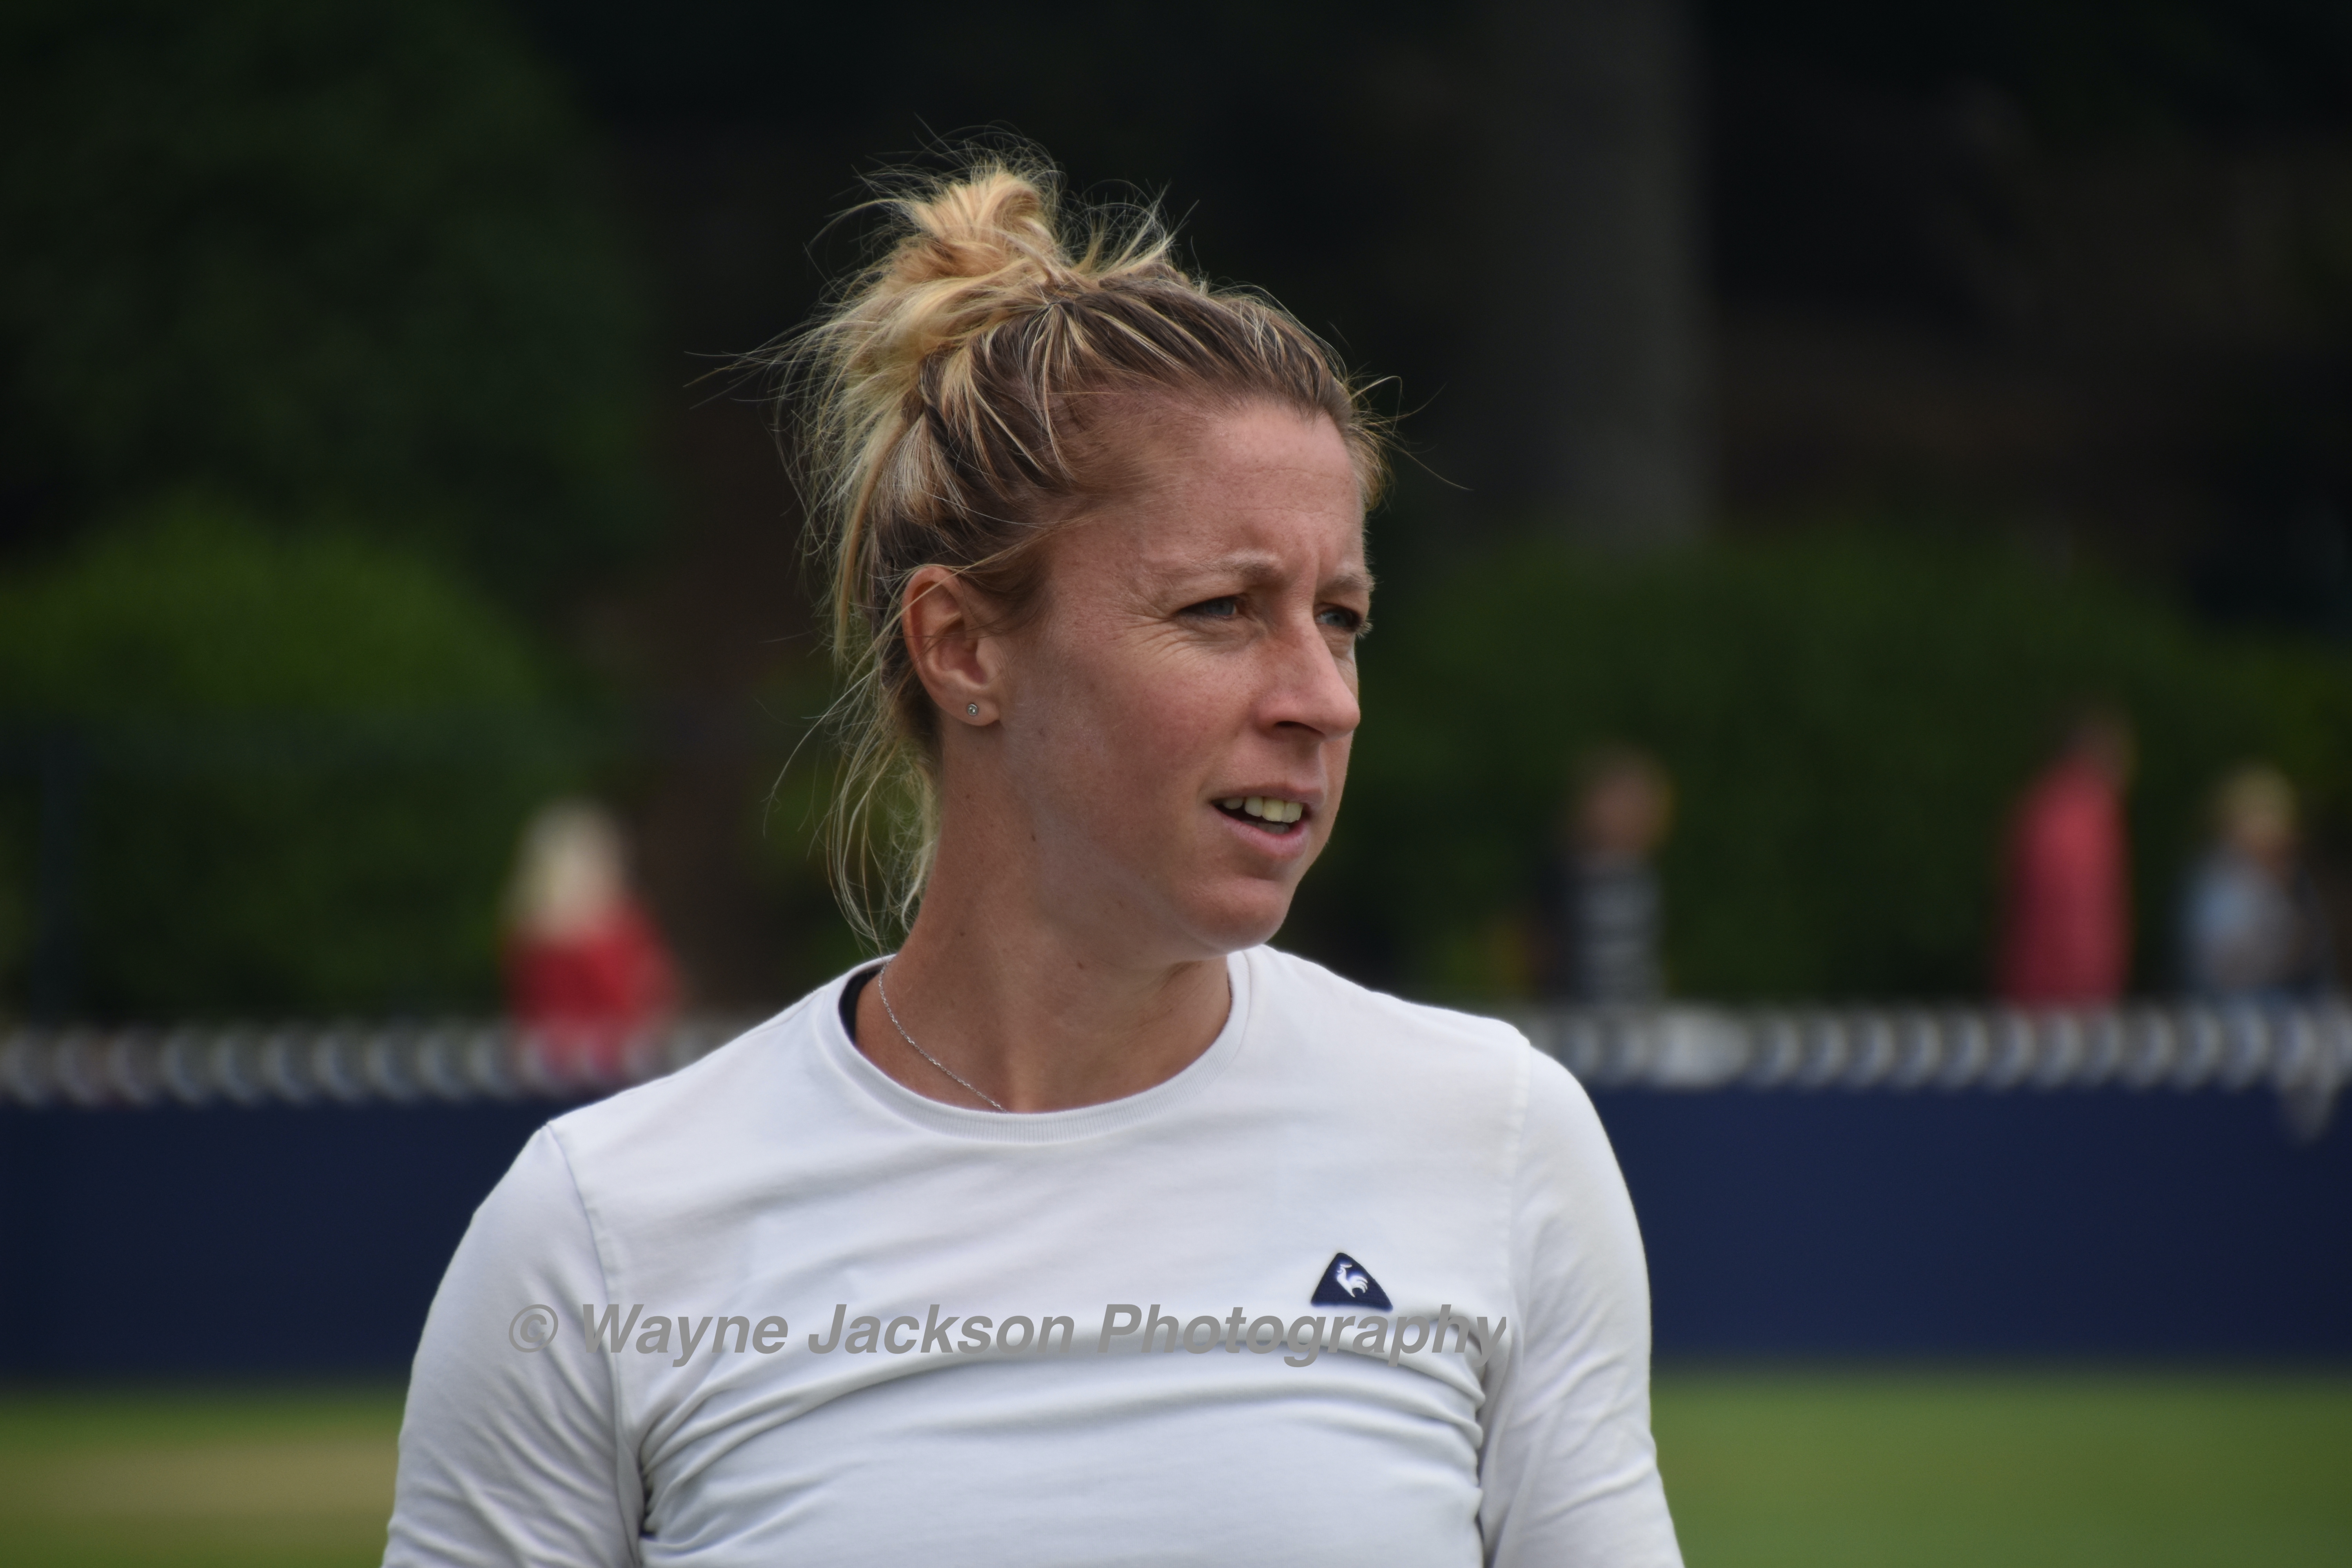 Pauline Parmentier at Eastbourne in 2019